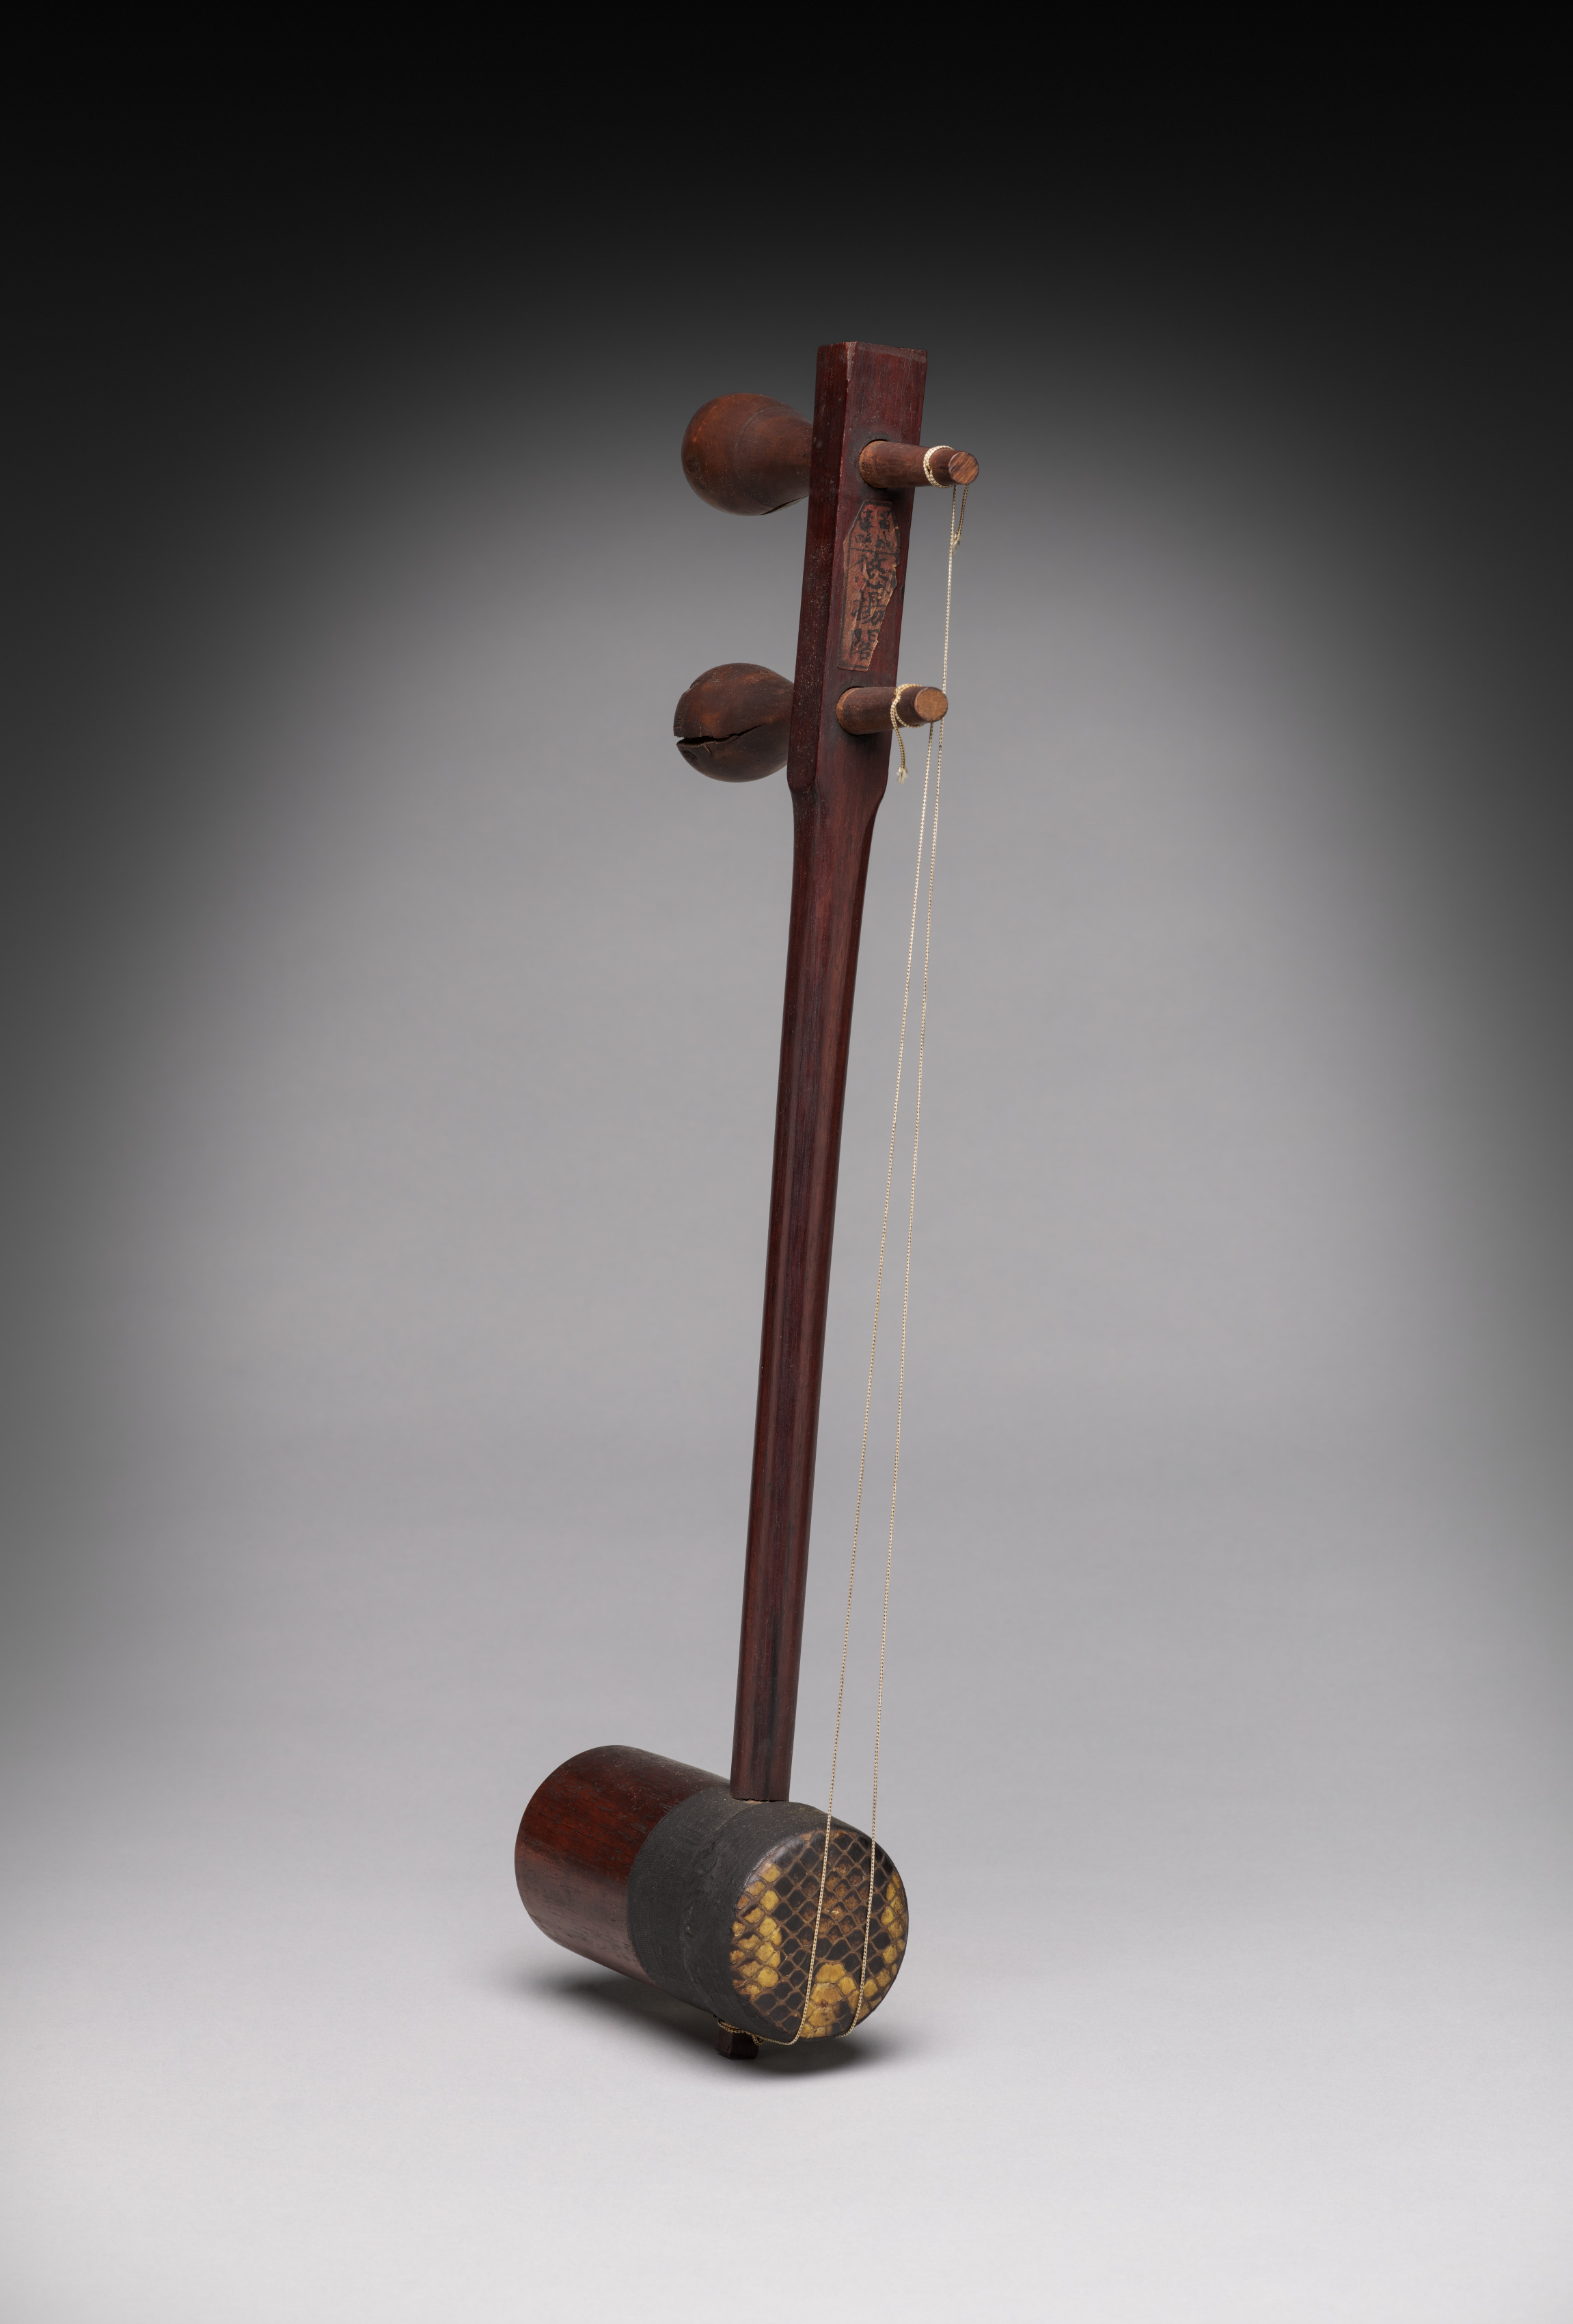 Erxian (Two-Stringed Chinese Fiddle)